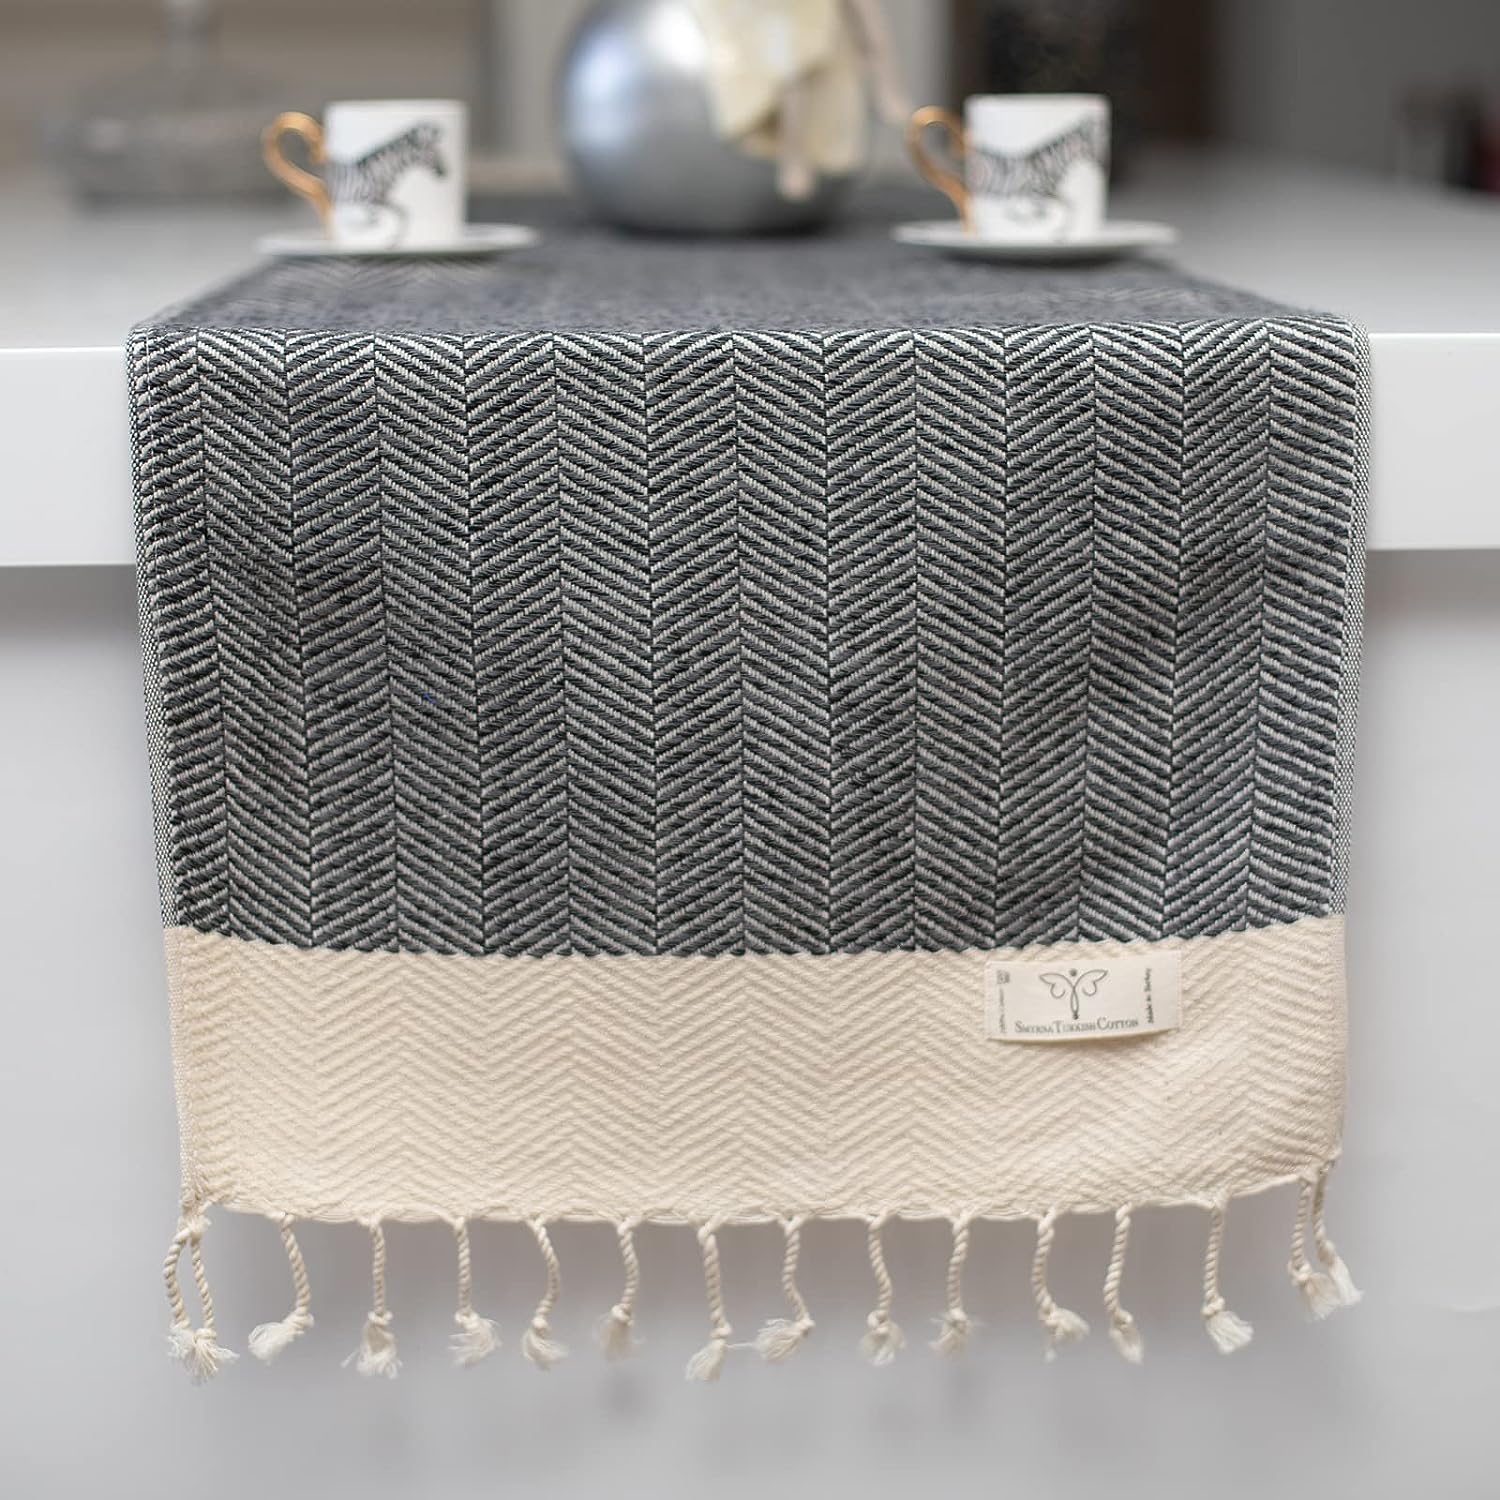 Smyrna Turkish Cotton Herringbone Series Table Runner 100% Cotton|Rectangular Table Cover & Protective Table Cloth|Made in Turkey|Doesn't Shrink| Premium Luxury (Dark Gray, 38 x 182 cm) 2